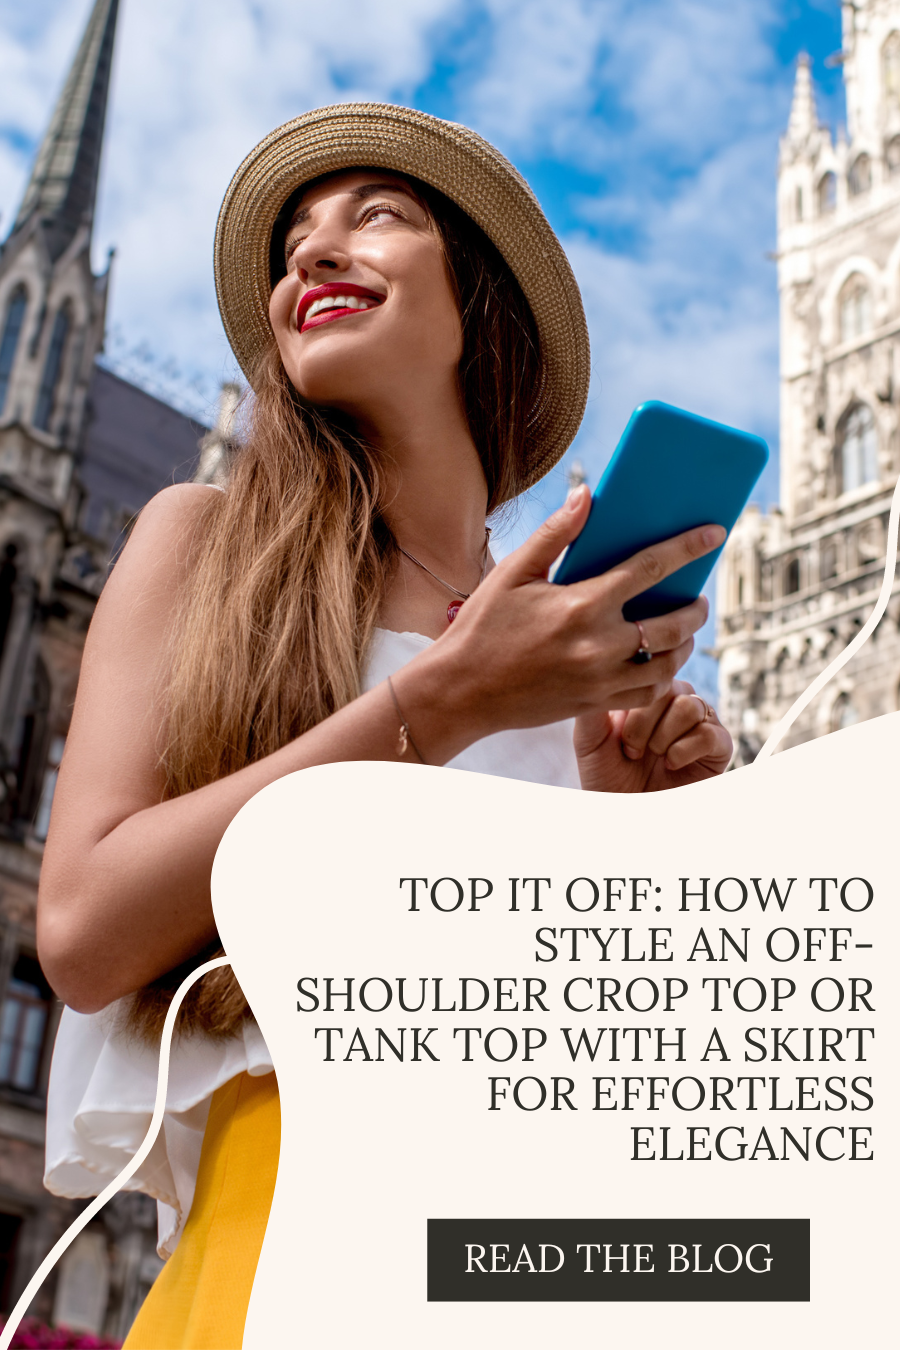 https://tieflyclothing.com/blogs/tie-fly-digest/top-it-off-how-to-style-an-off-shoulder-crop-top-or-tank-top-with-a-skirt-for-effortless-elegance